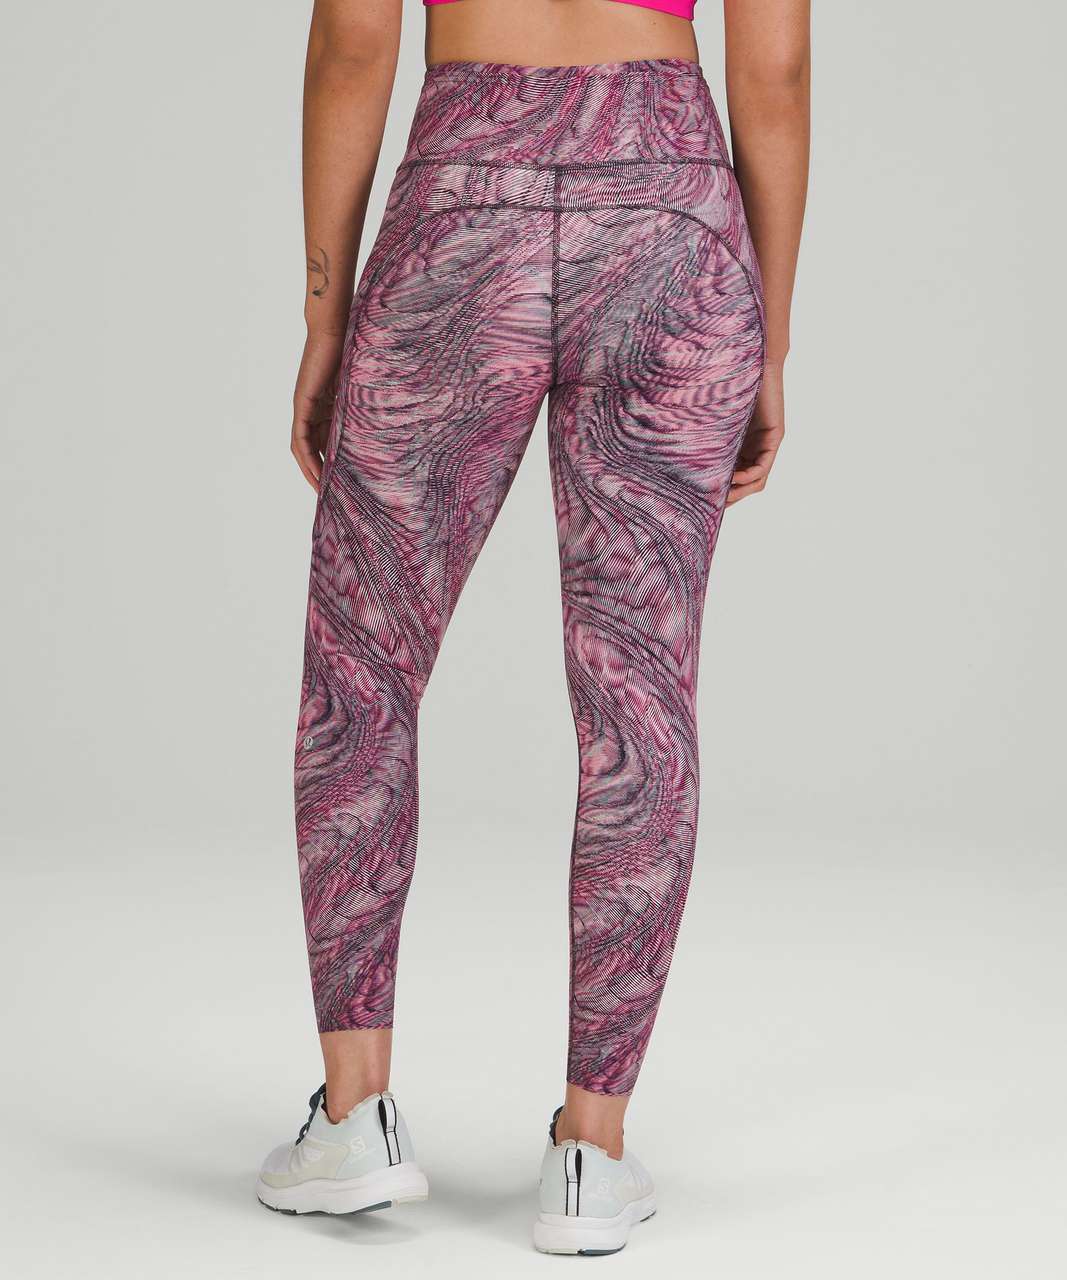 Lululemon Fast and Free High-Rise Reflective Tight 25" *Nulux - Dimensional Sonic Pink Multi